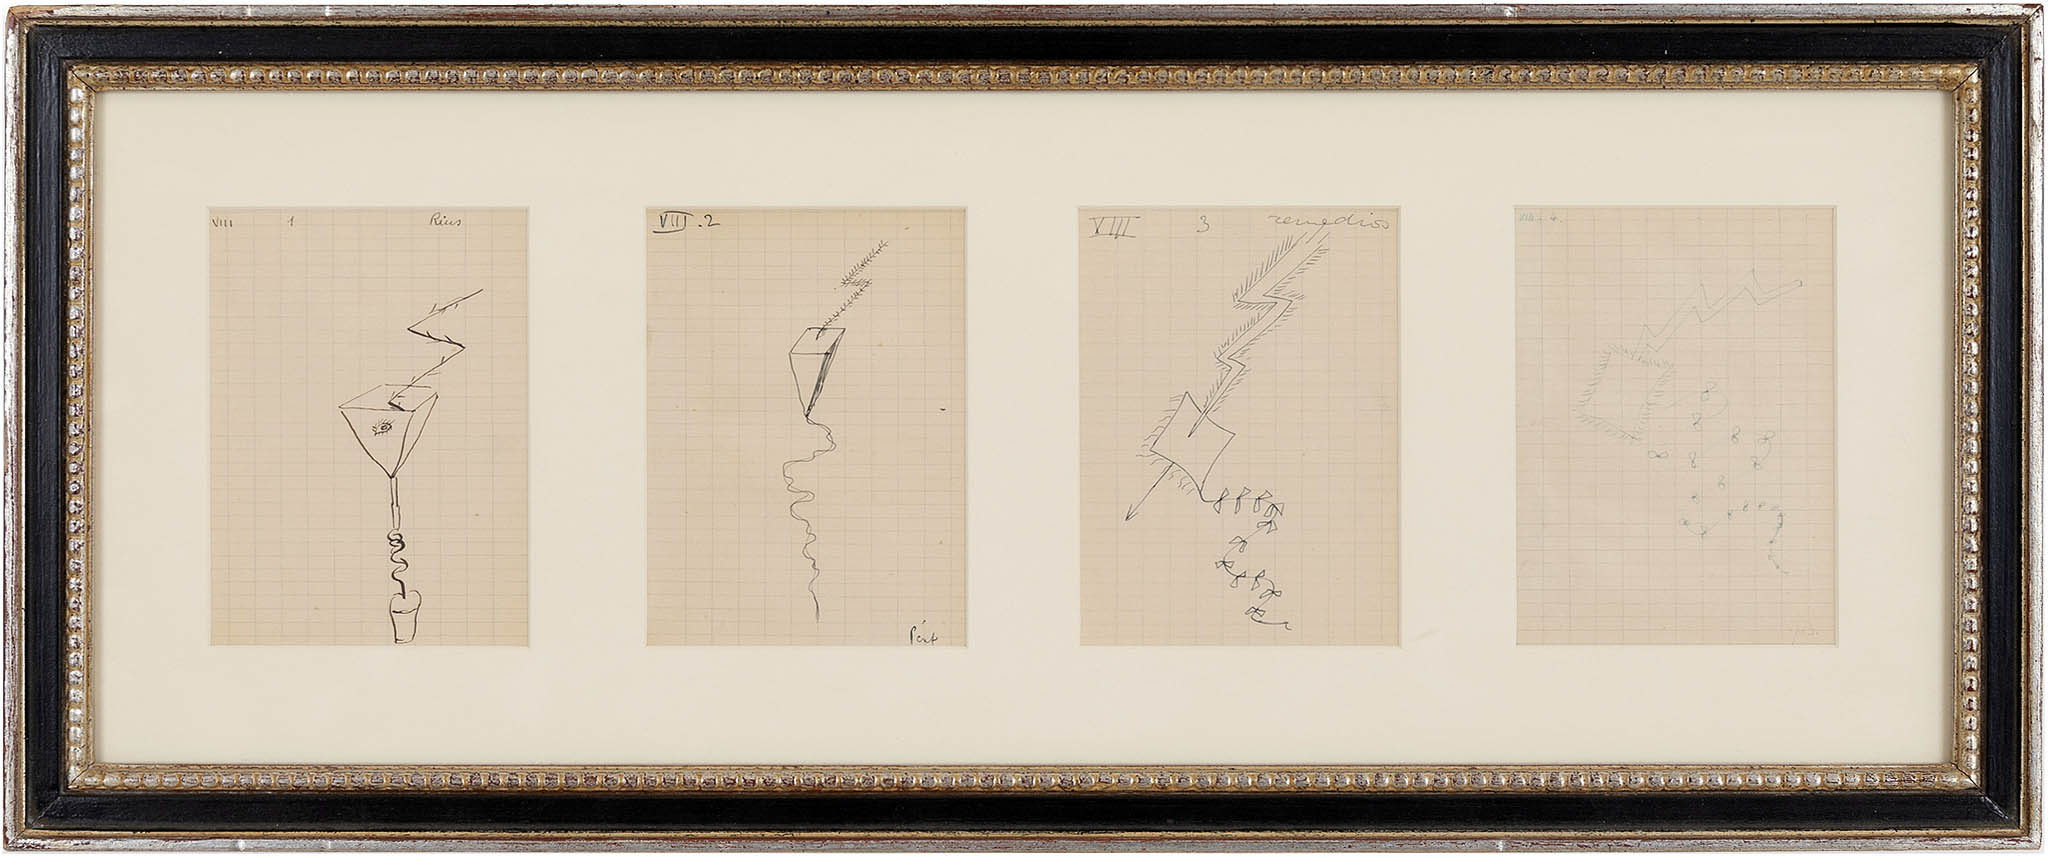 Jeu de Dessin Communique (Game of Communicated Drawing) - Robert Rius - Benjamin Peret - Remedios Varo - Andre Breton - L'éclair et le Cerf-Volant (The Lightning and the Kite) - c.1938 pencil and ink on four sheets of paper